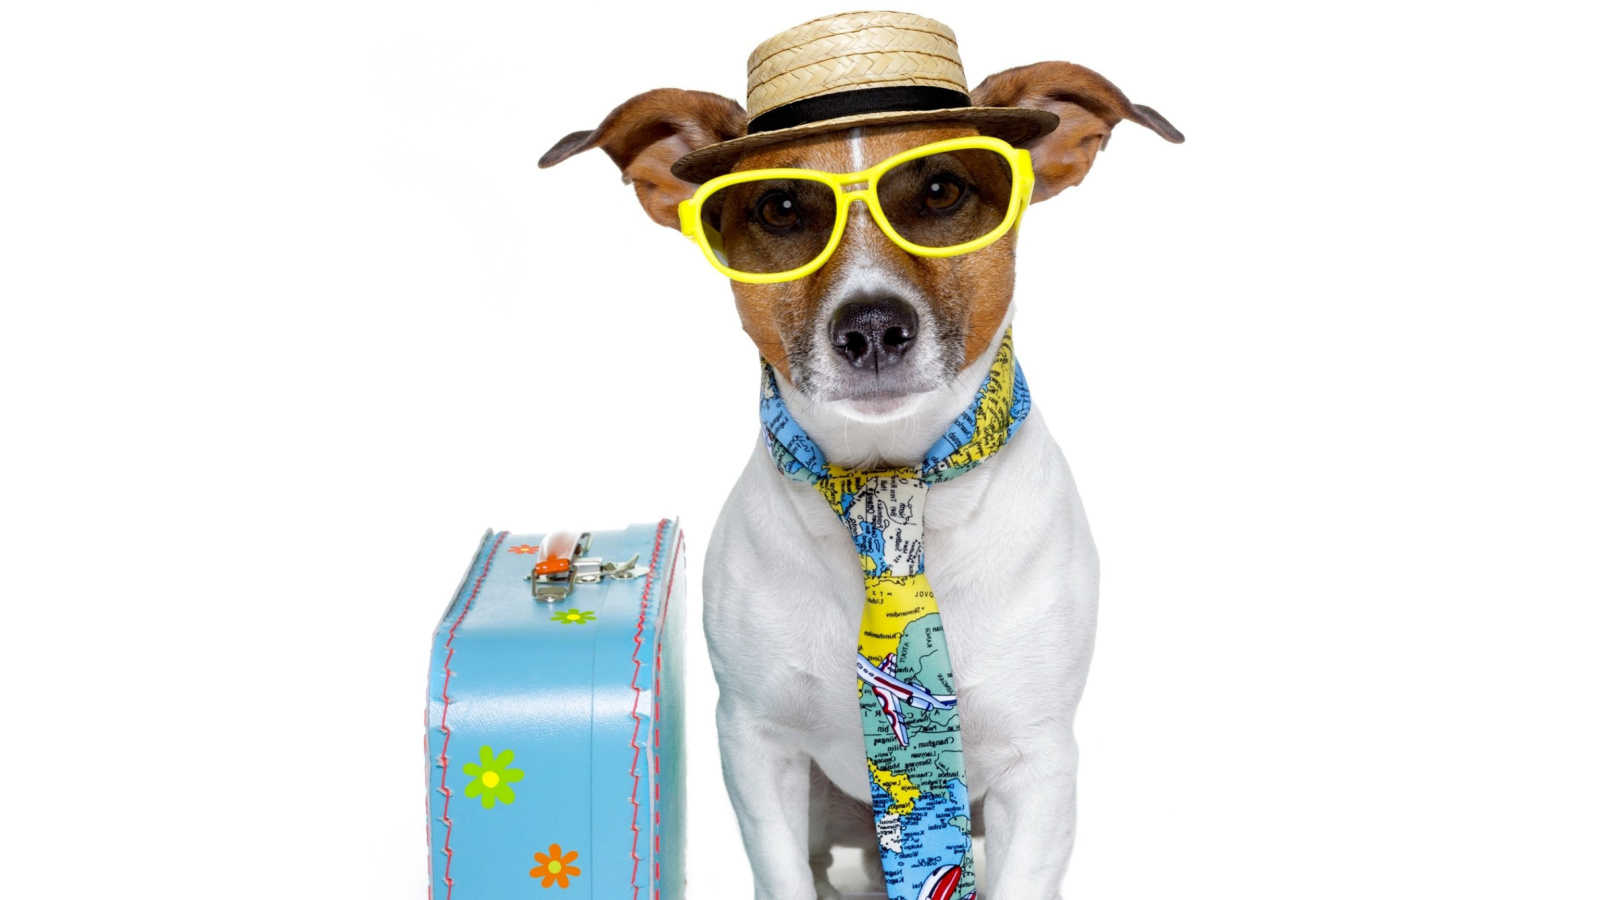 Funny dog going on holiday wallpaper 1600x900